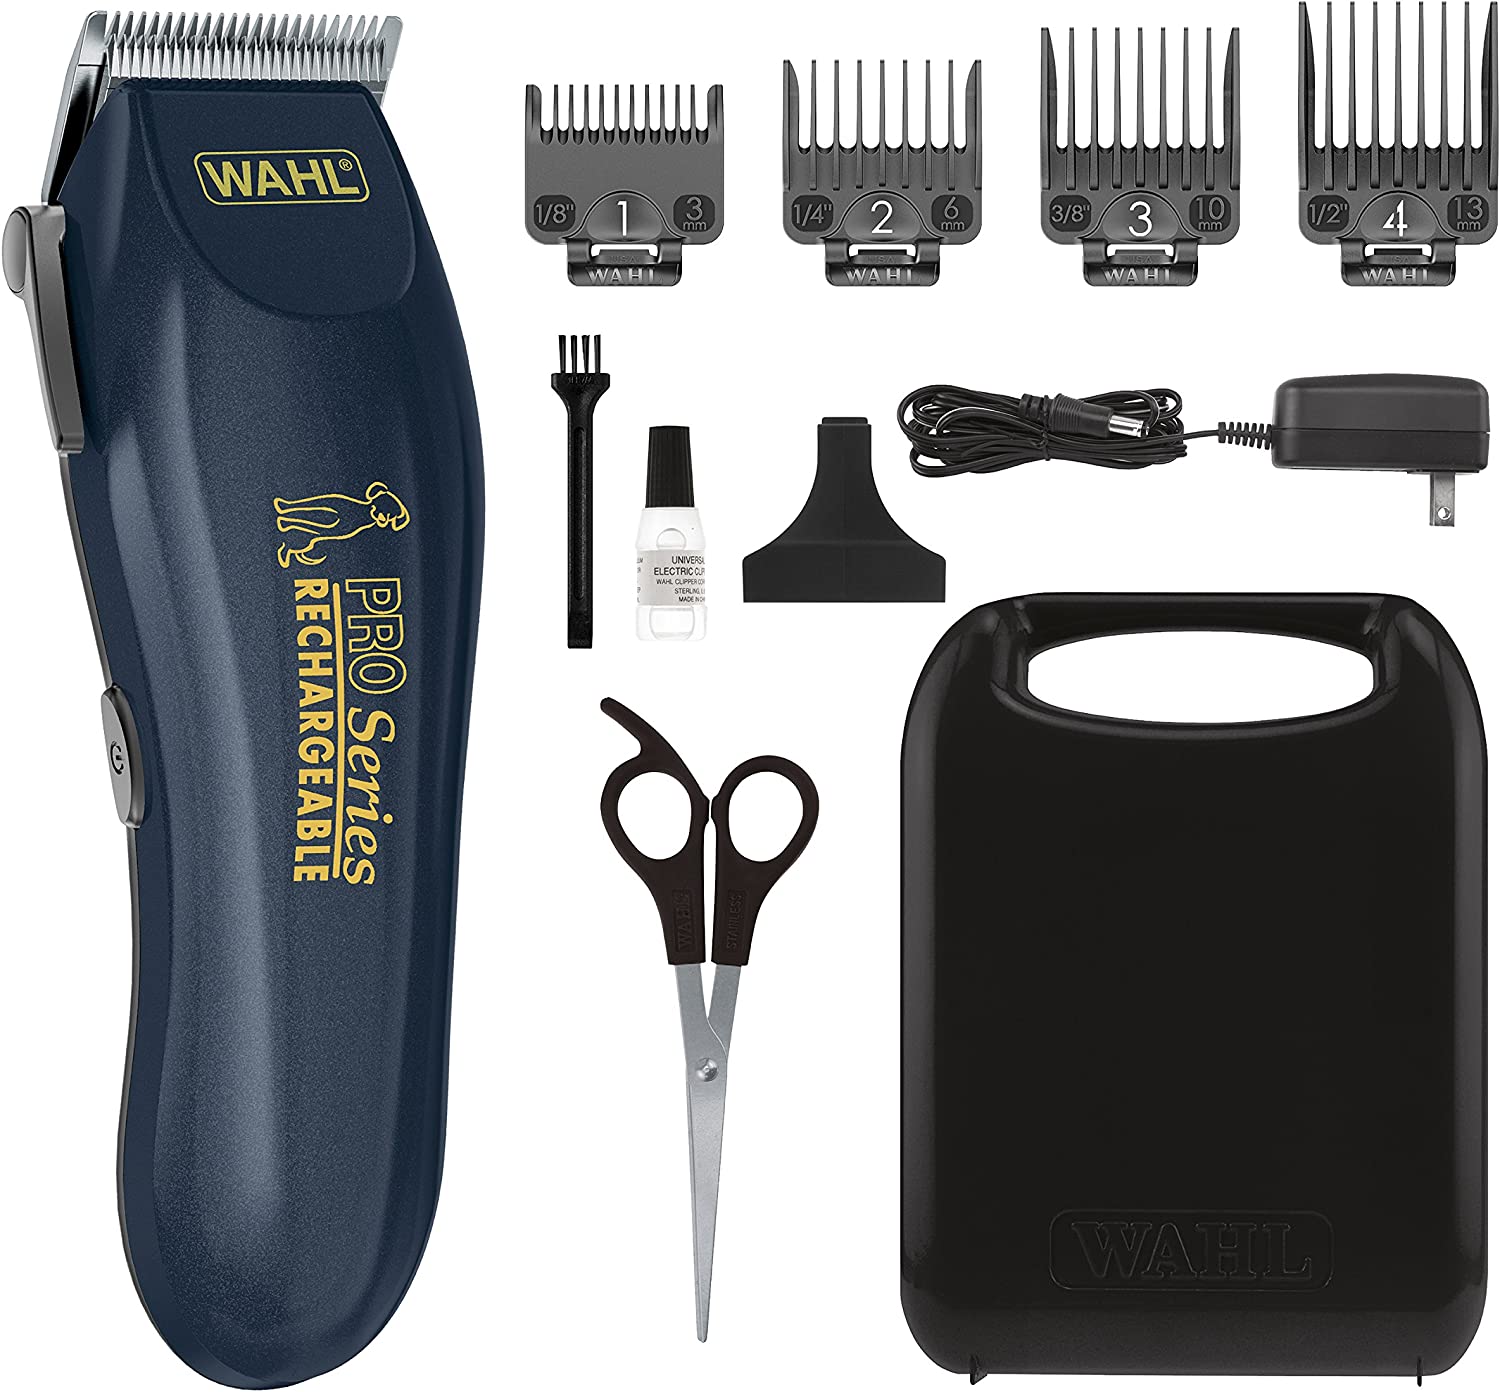 Wahl Deluxe Pro Series Cordless Lithium Ion Clipper Kit